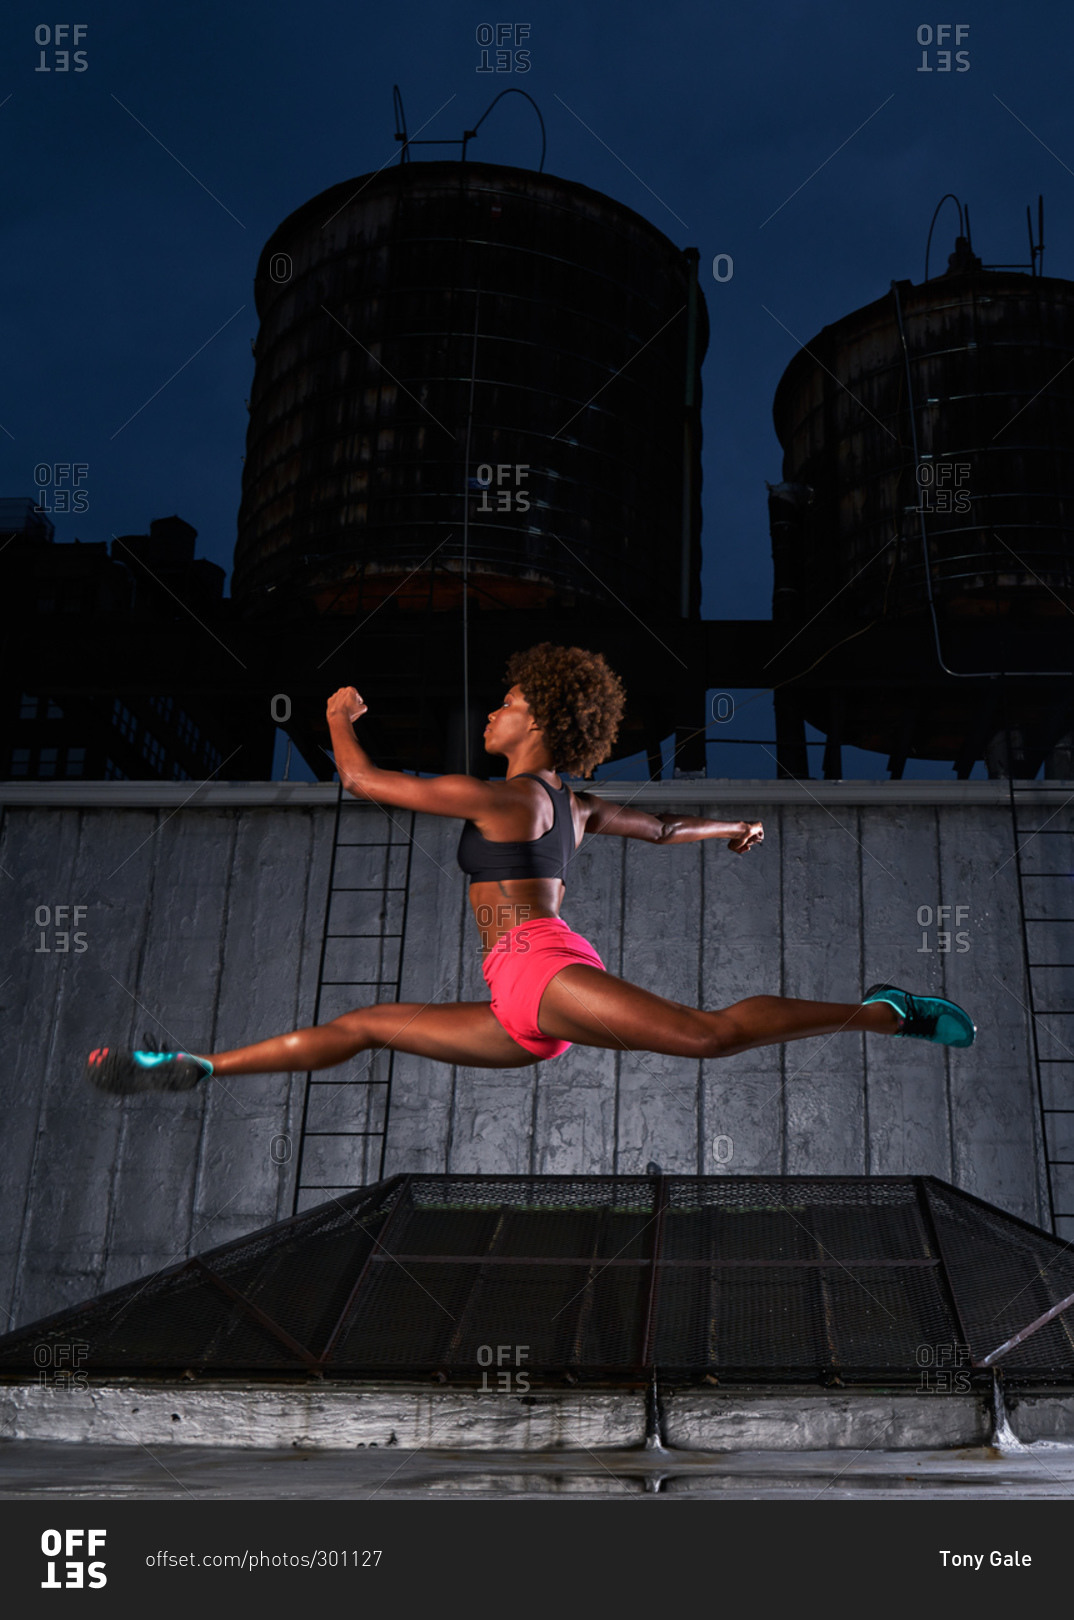 Athletic dancer leaping on a rooftop